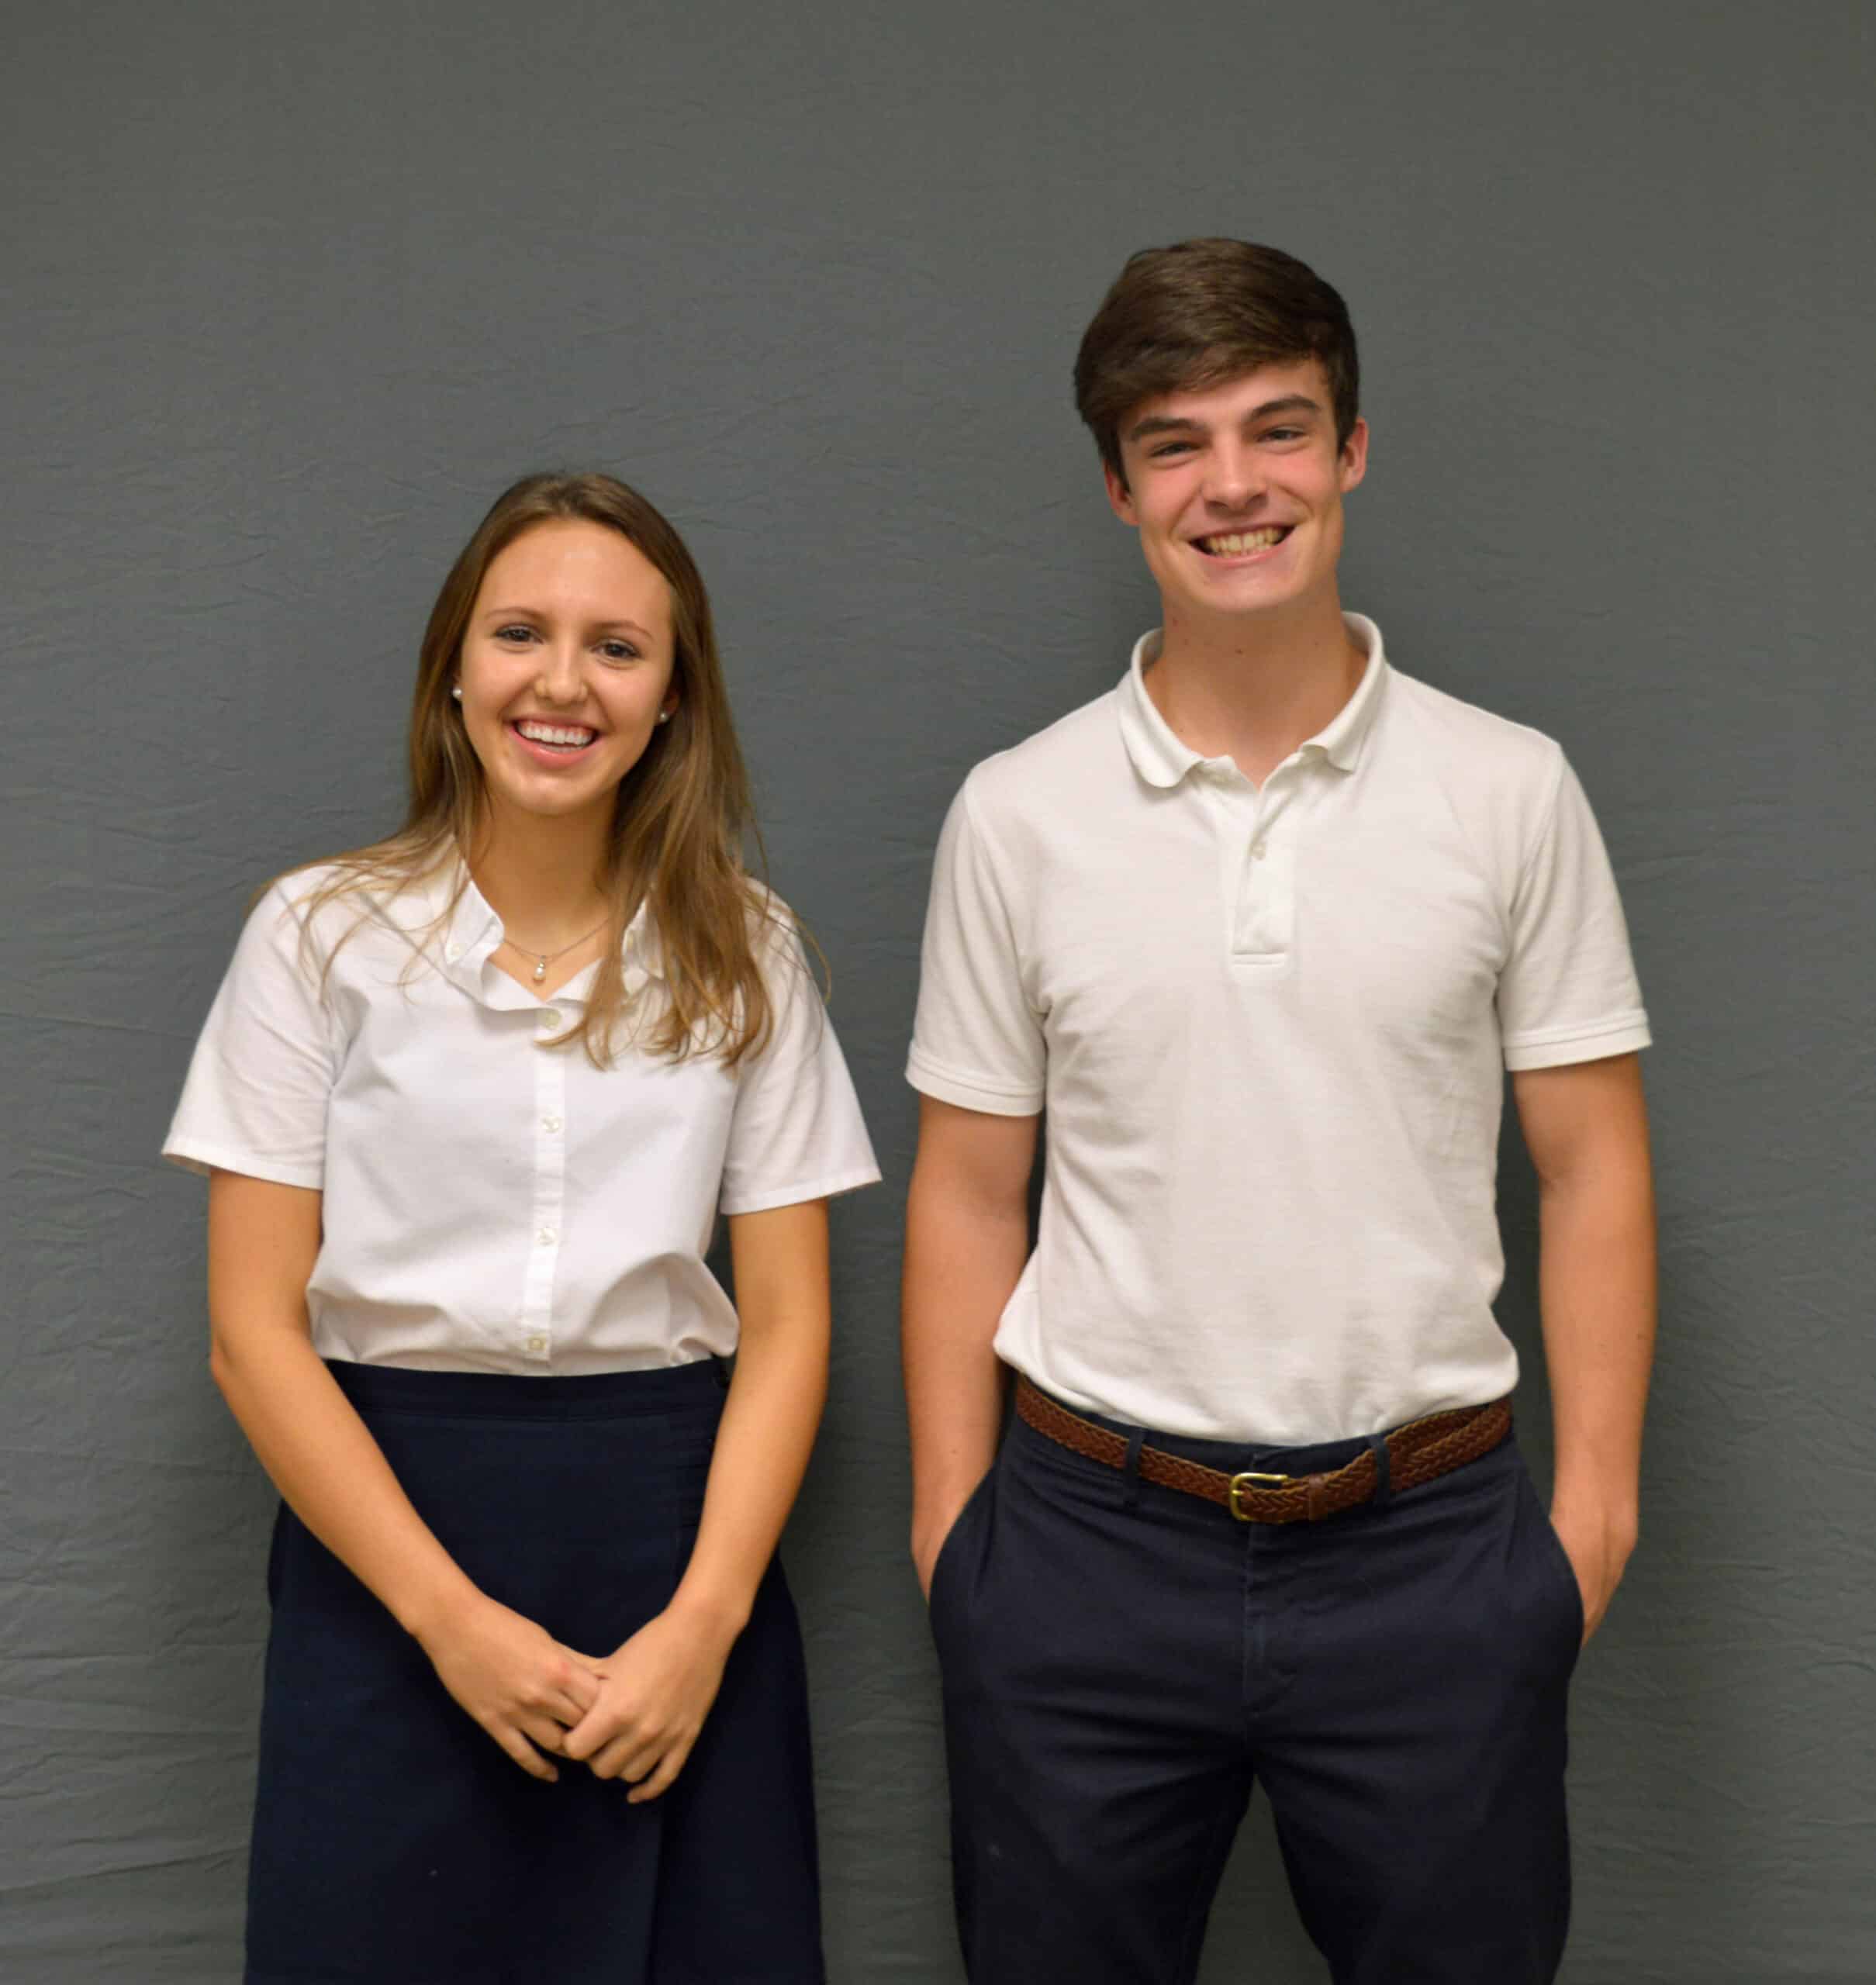 Senior Class of 2019, Isabelle Wachs and Charlie MacAdam